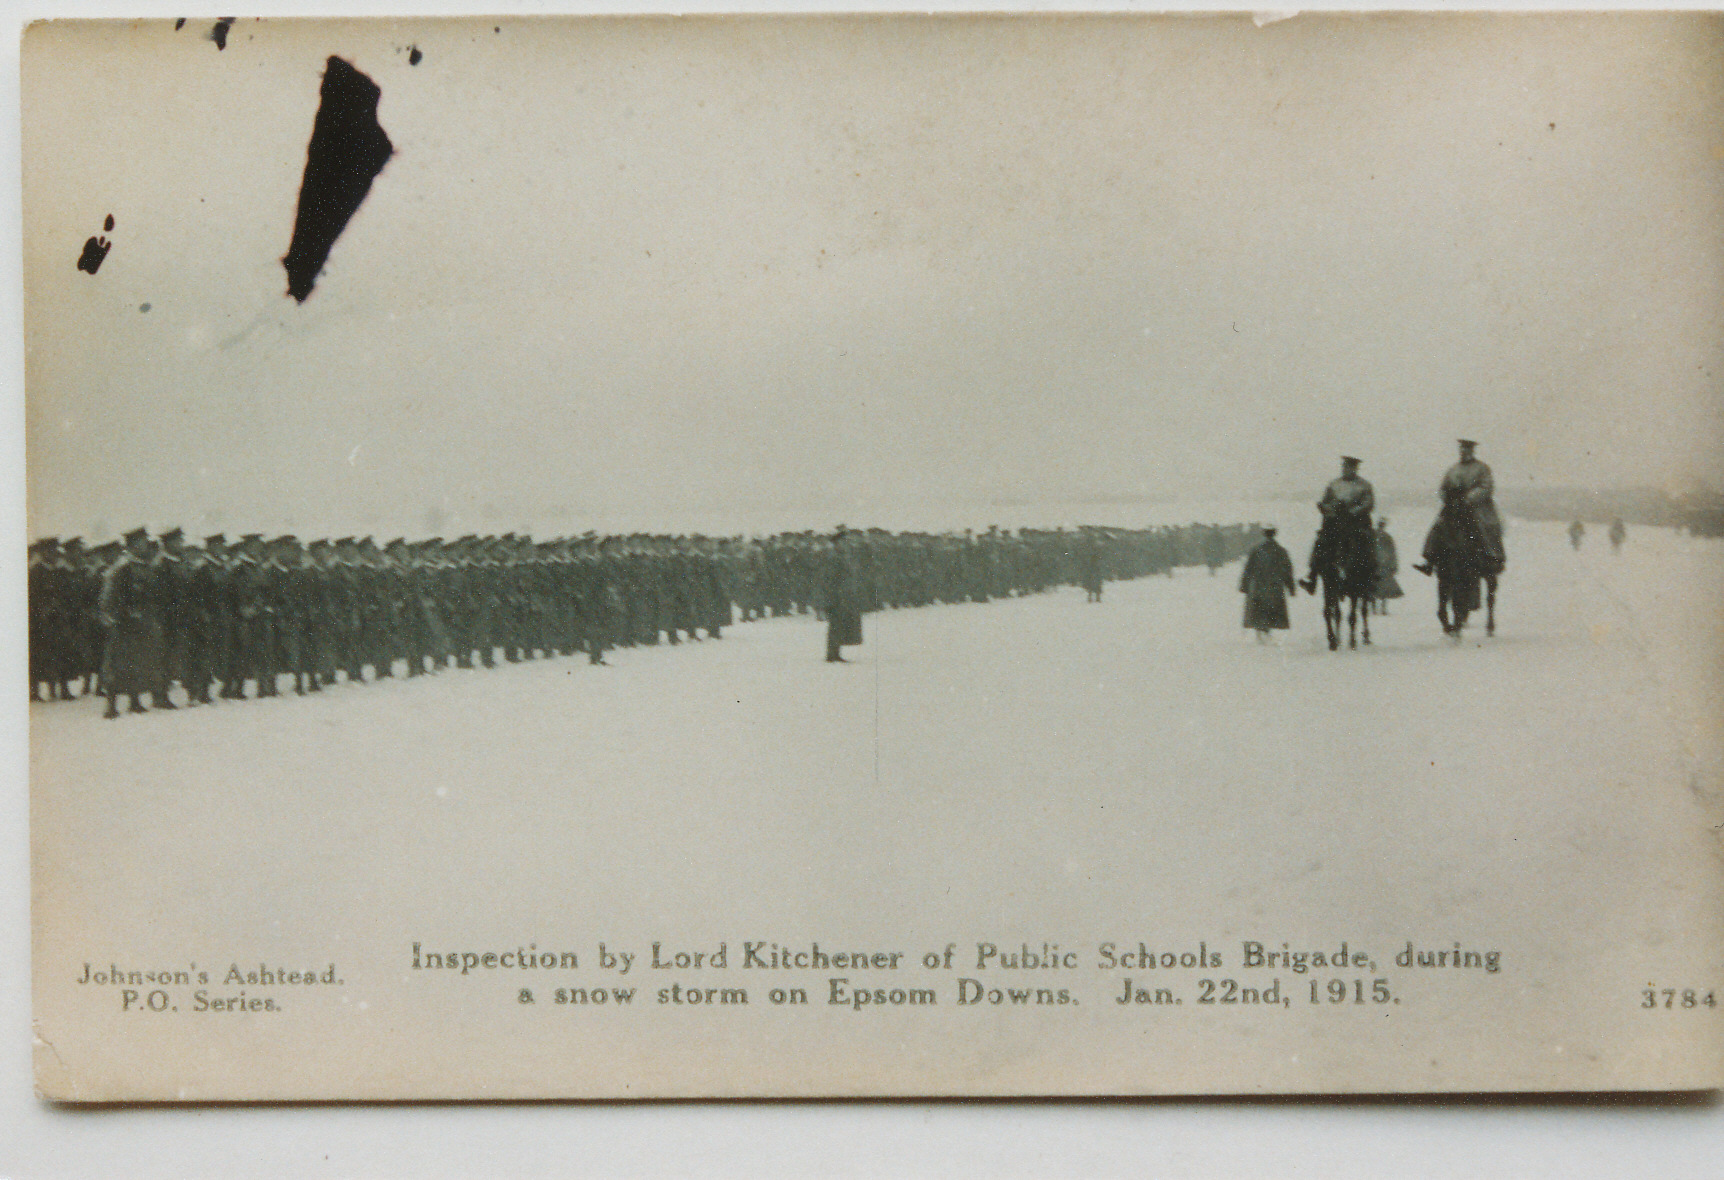 20,000 men paraded on the Downs in WW1